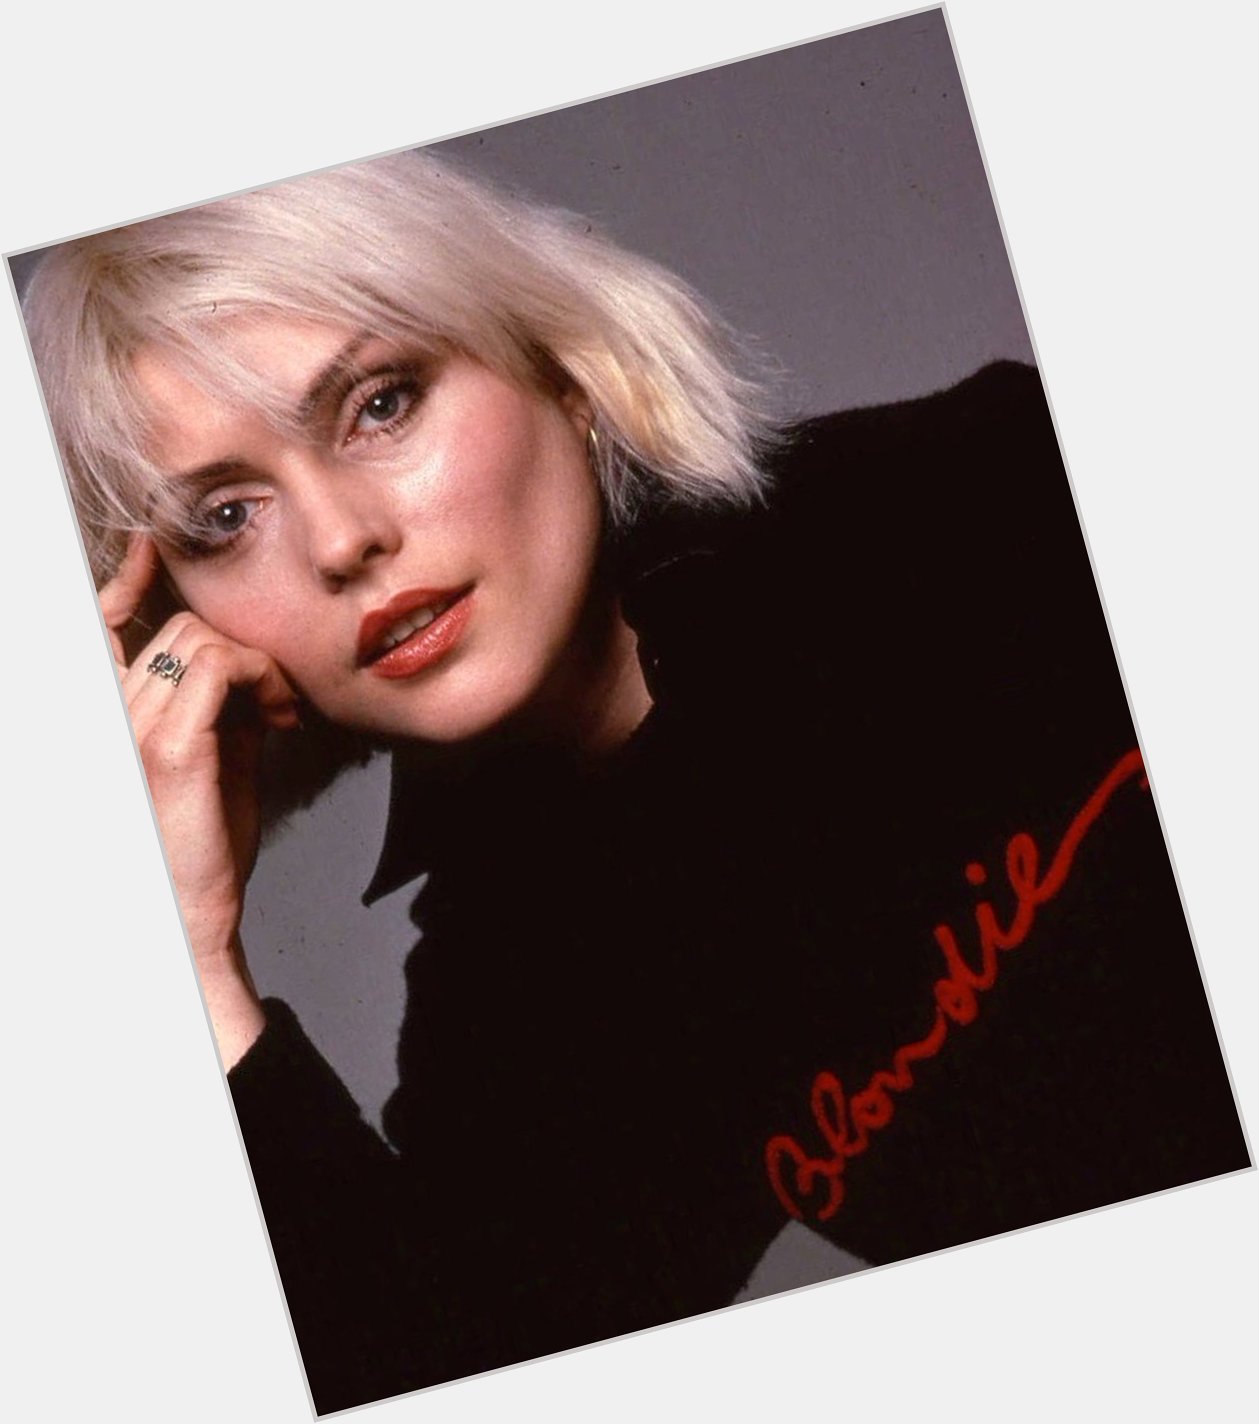 Happy birthday debbie harry, i love you more than words can tell 